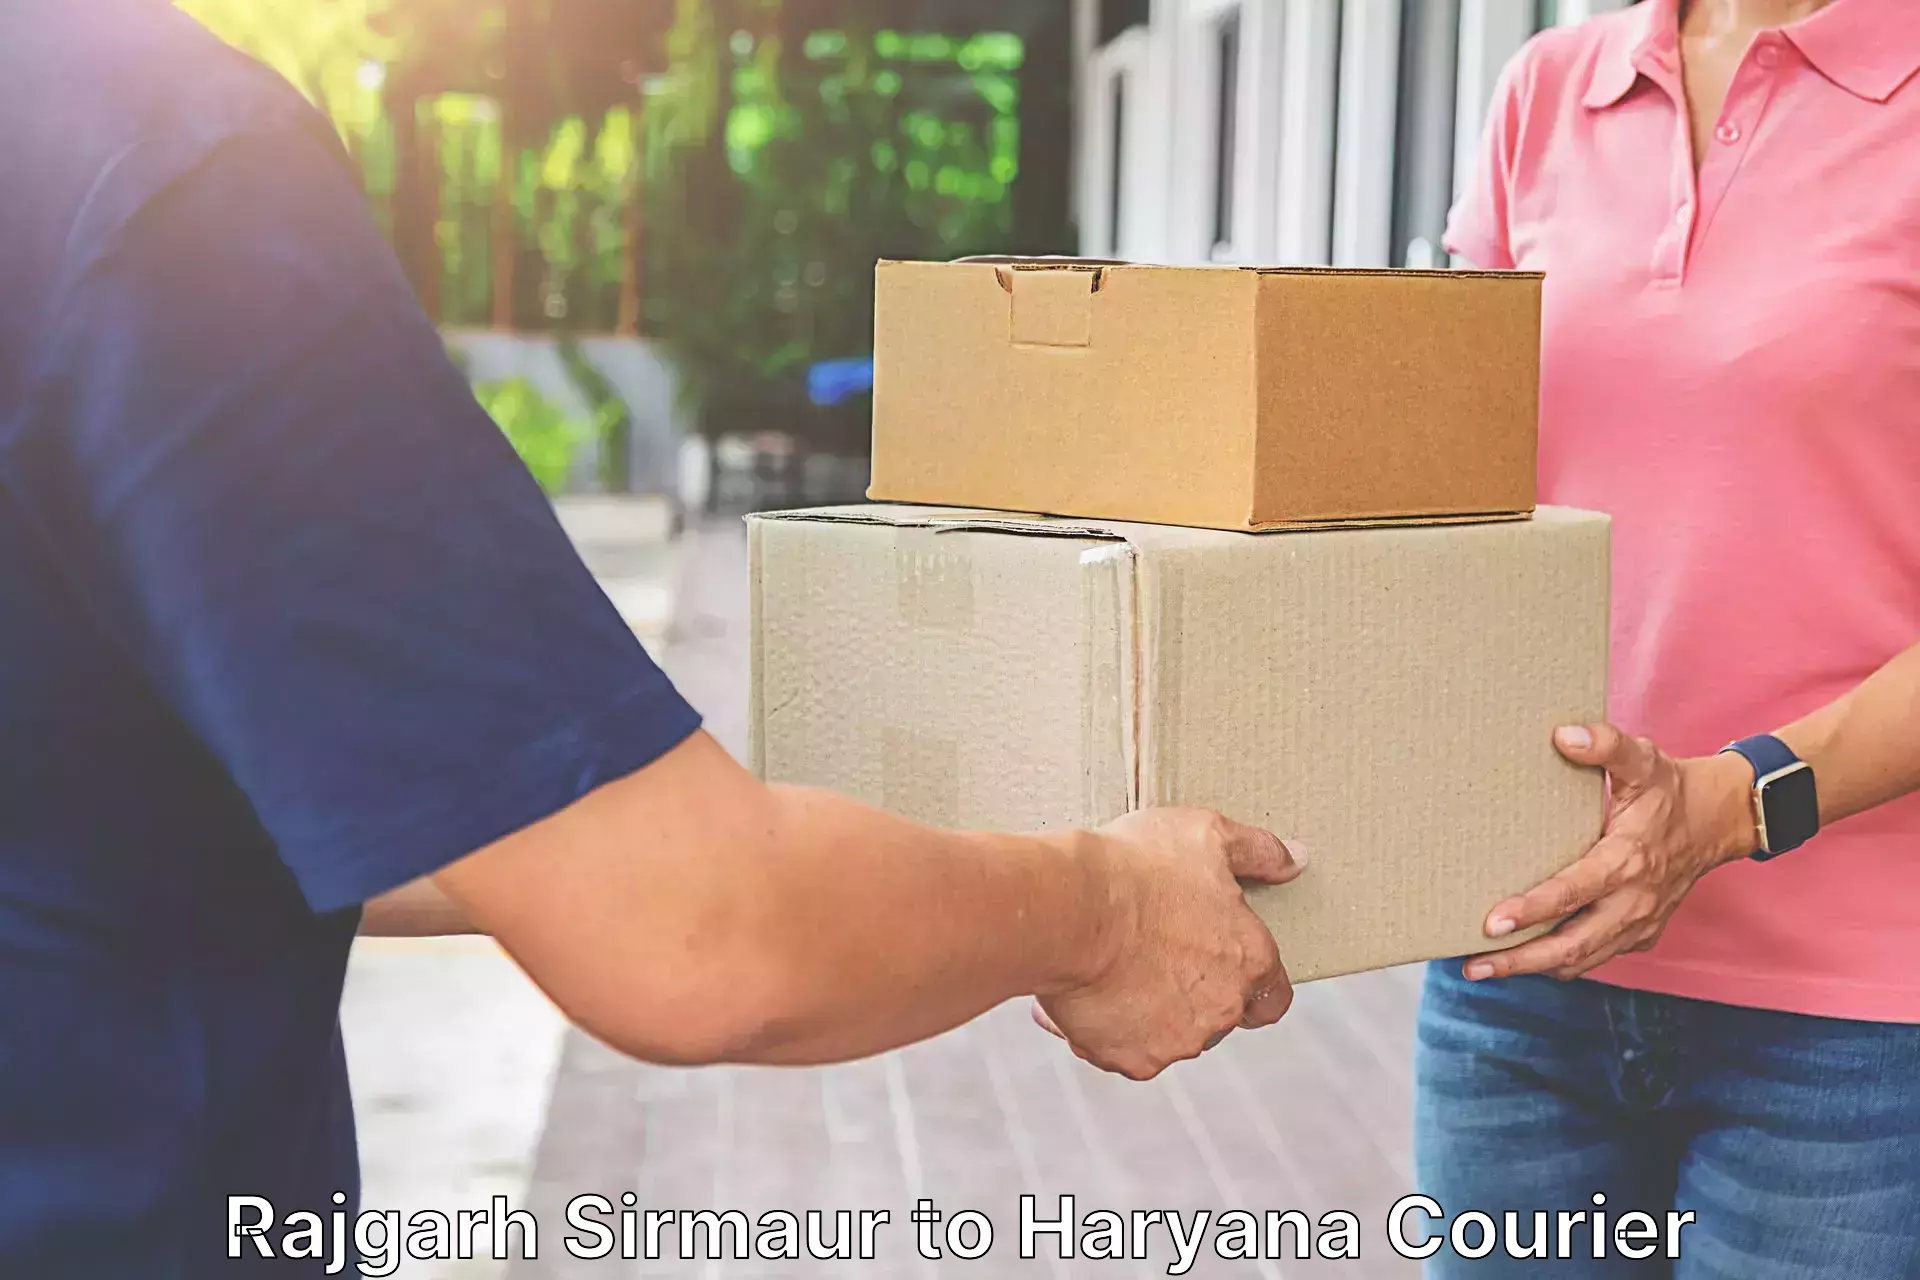 Quality courier services in Rajgarh Sirmaur to Chaudhary Charan Singh Haryana Agricultural University Hisar